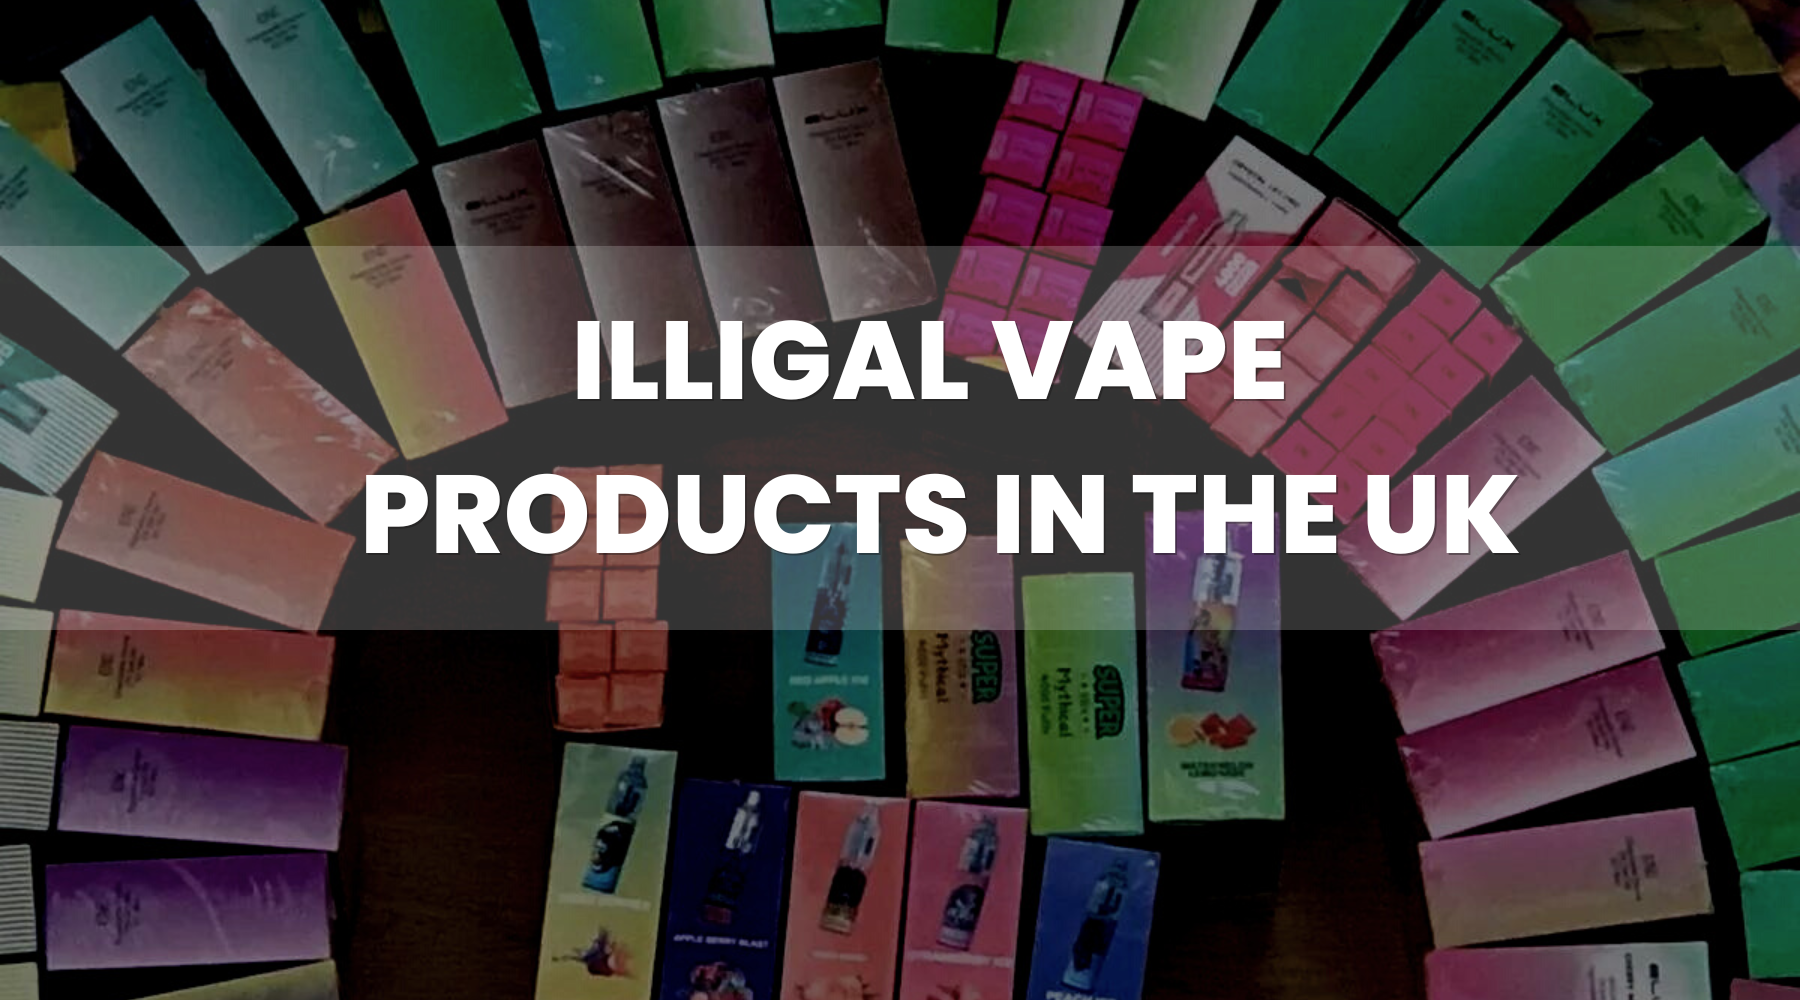 Trading Standards Estimate 1/3 of all Vape Products are Illegal